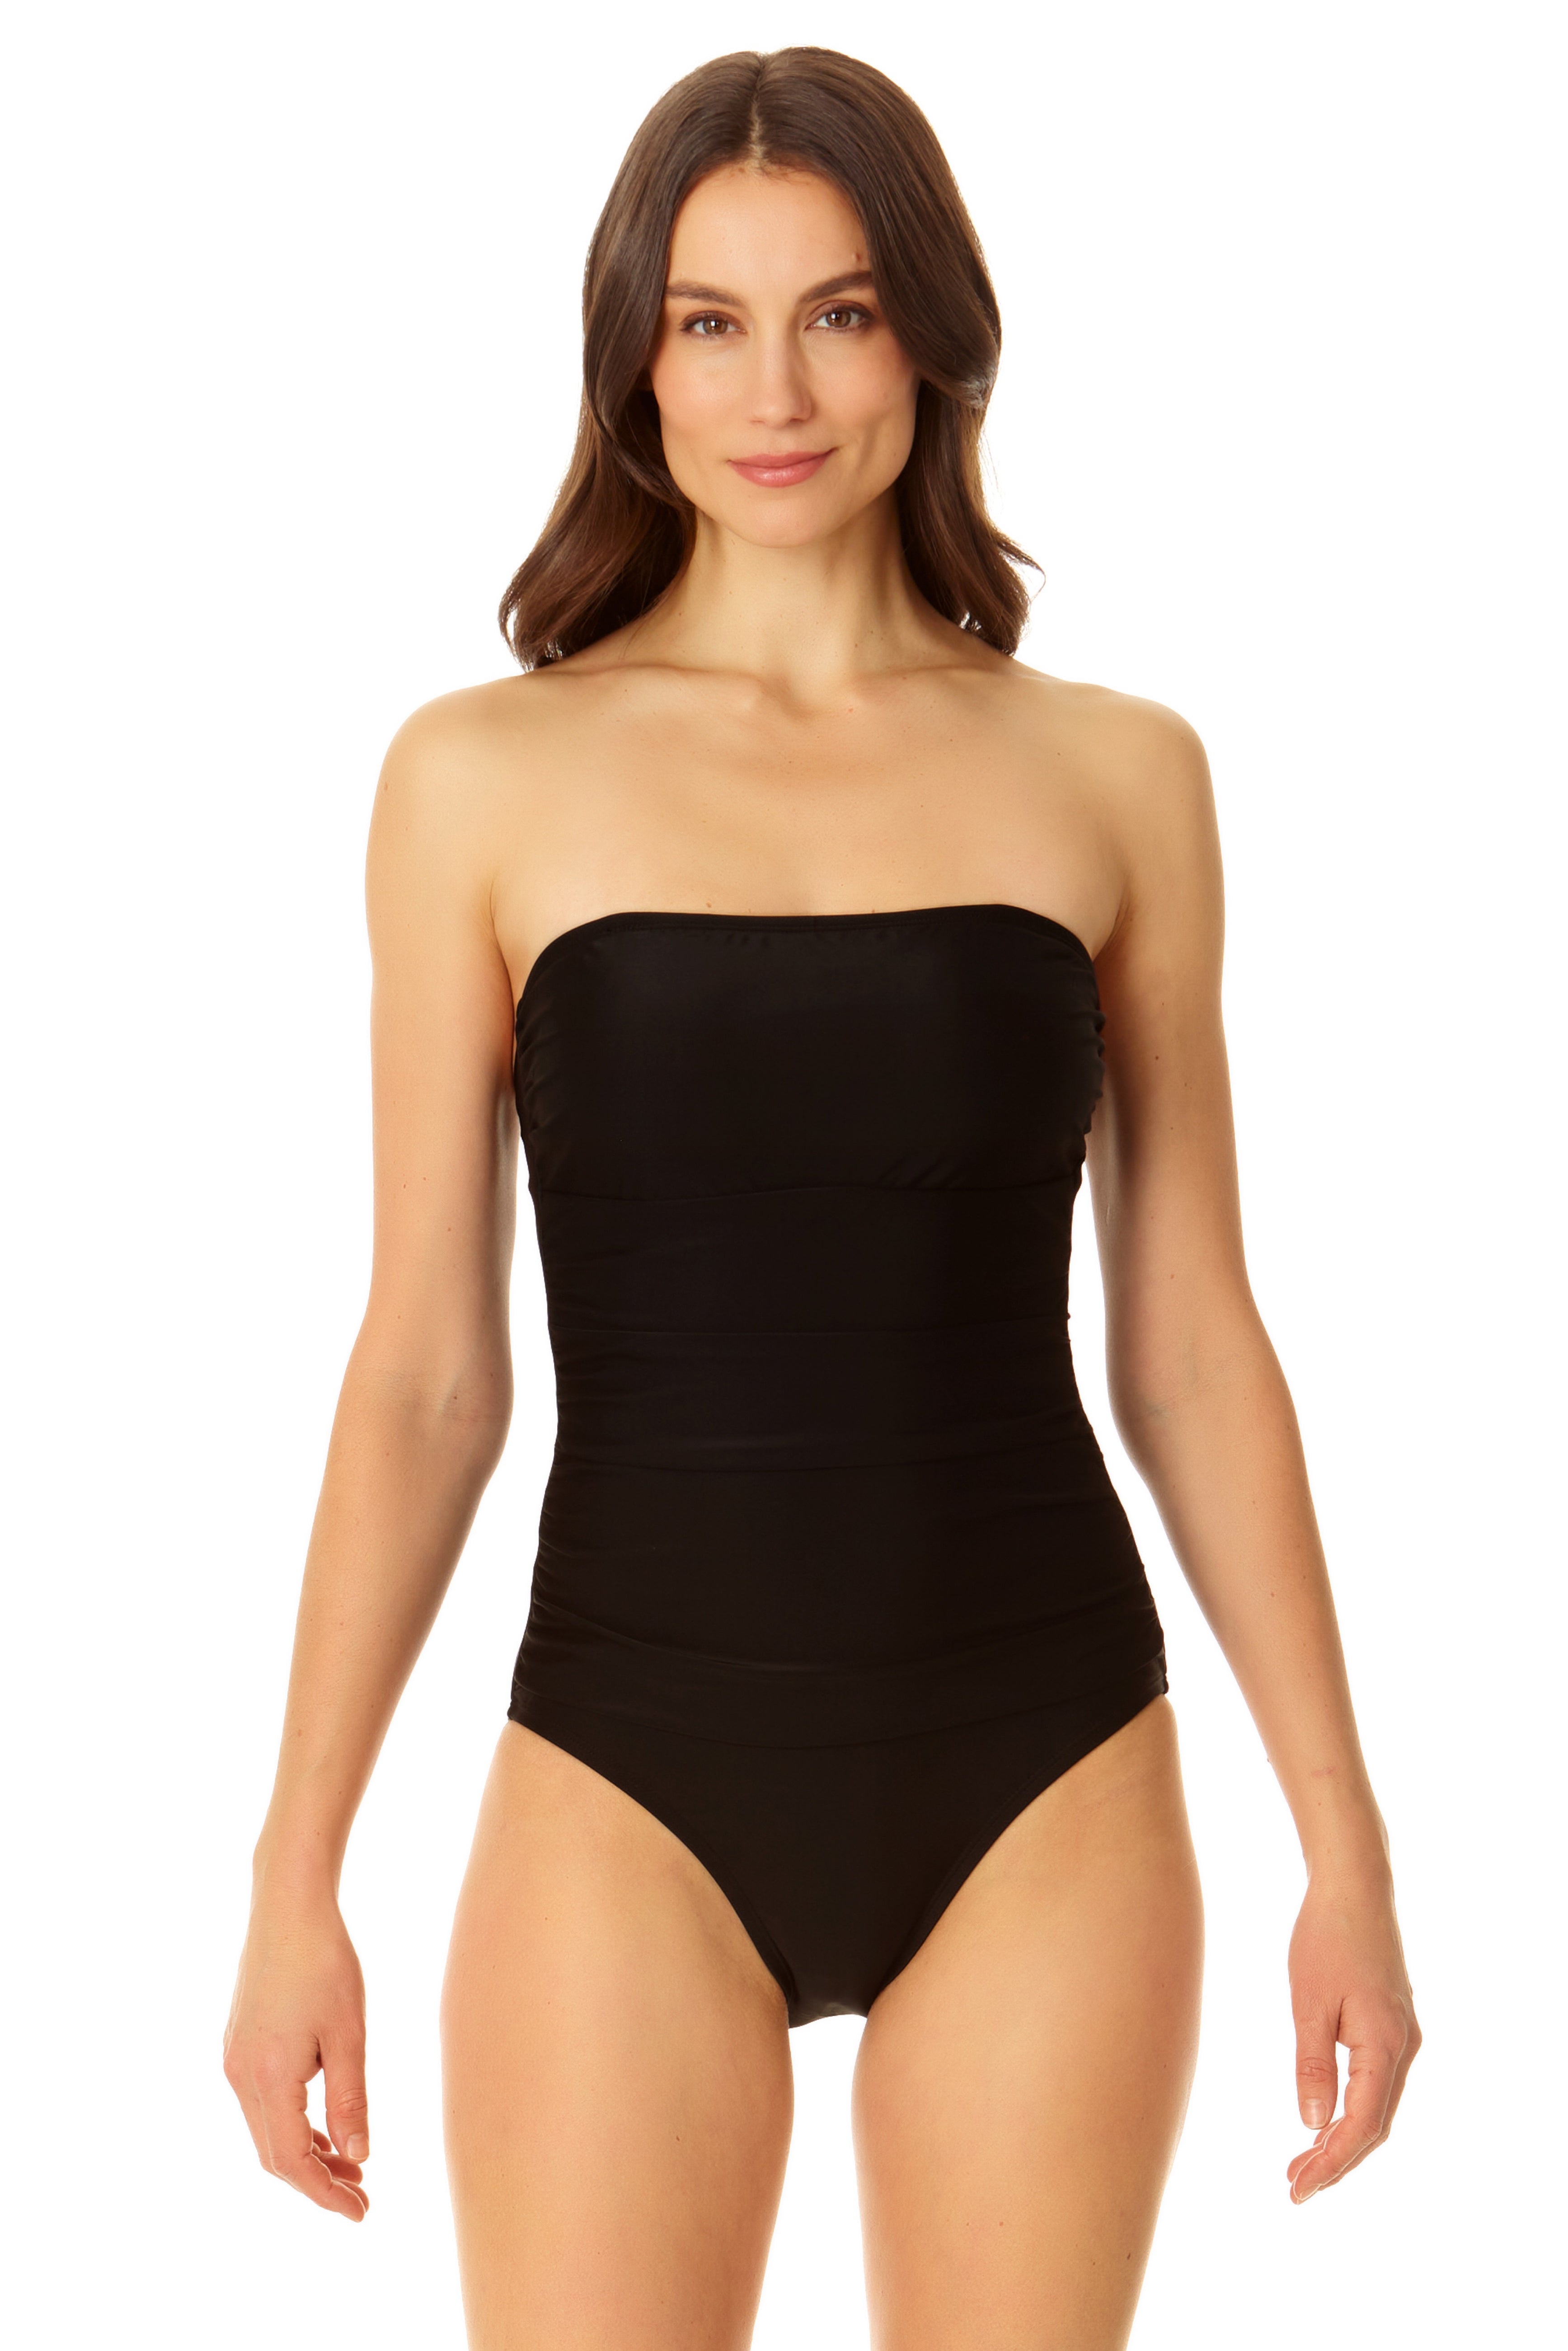 Qopobobo One Piece Swimsuit Women Women's One Piece Swimsuits Tummy Control  Cutout Frontcross High Waisted Bathing Suit Black at  Women's  Clothing store